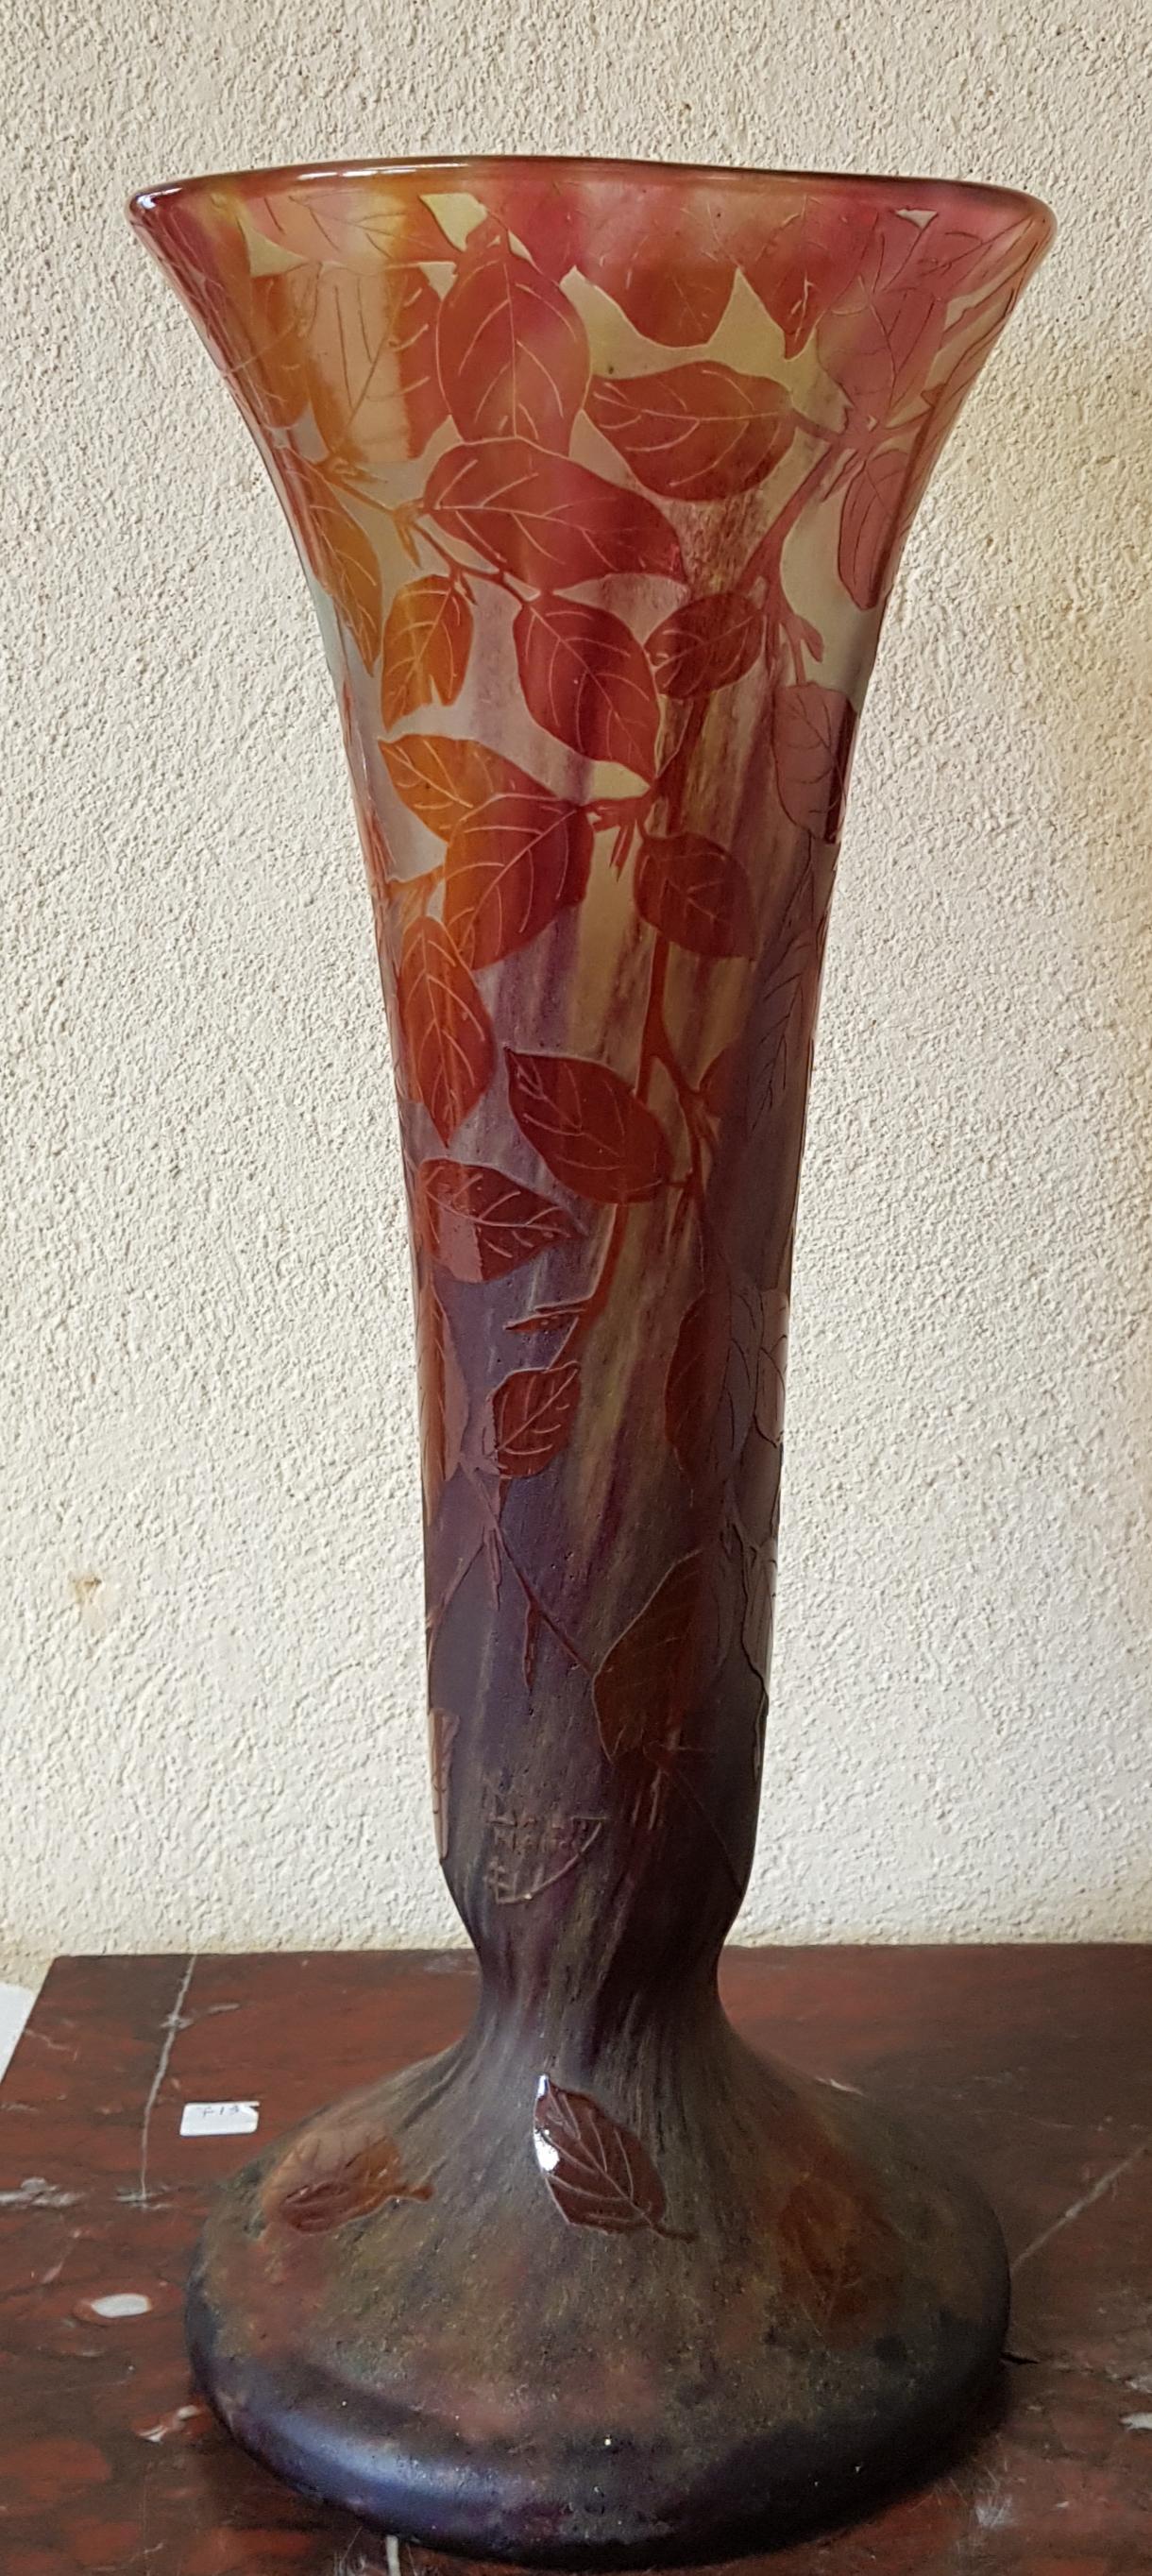 Daum: large glass trumpet vase with clear background and decoration with brown red vegetable motifs
Signed.